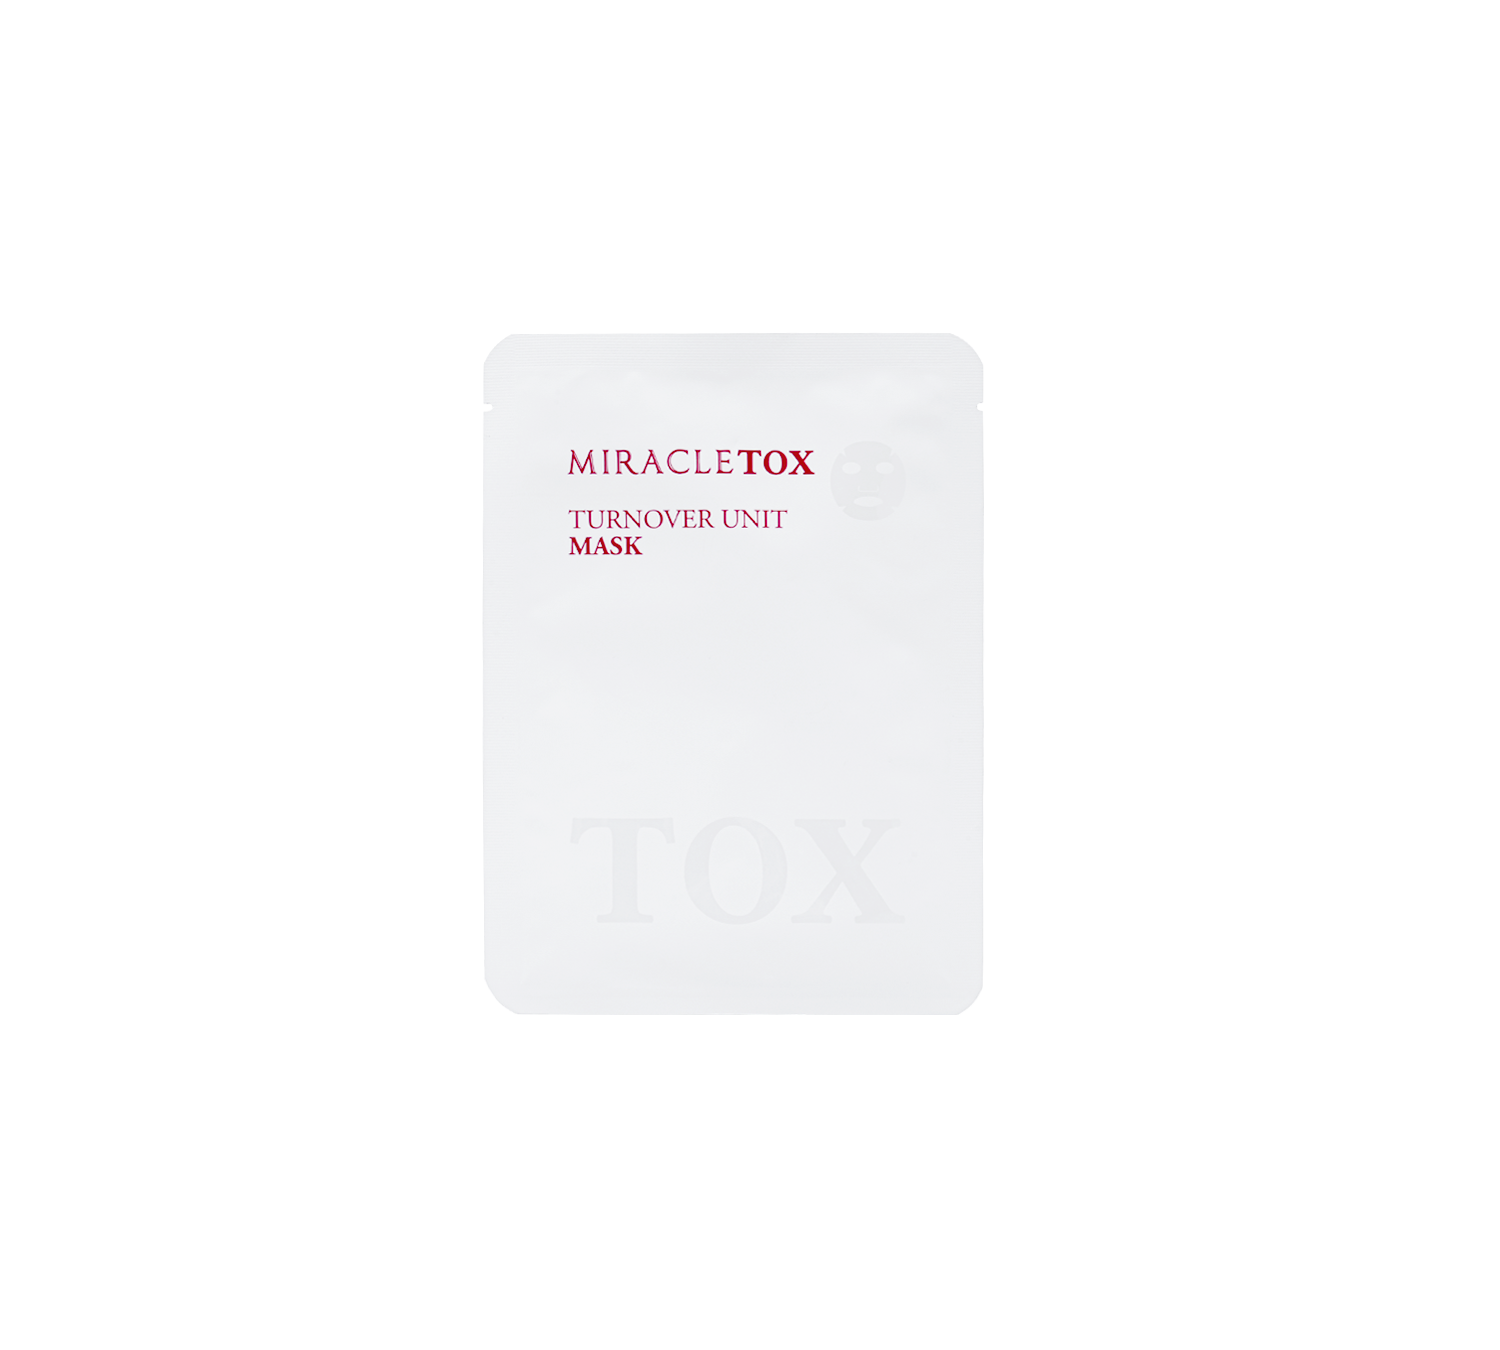 Revitalize Your Skin: Shop MIRACLETOX TURNOVER Facial Mask for a Radiant, Youthful Glow - Wrinkle Reduction, Skin Brightening, and Ultimate Hydration.